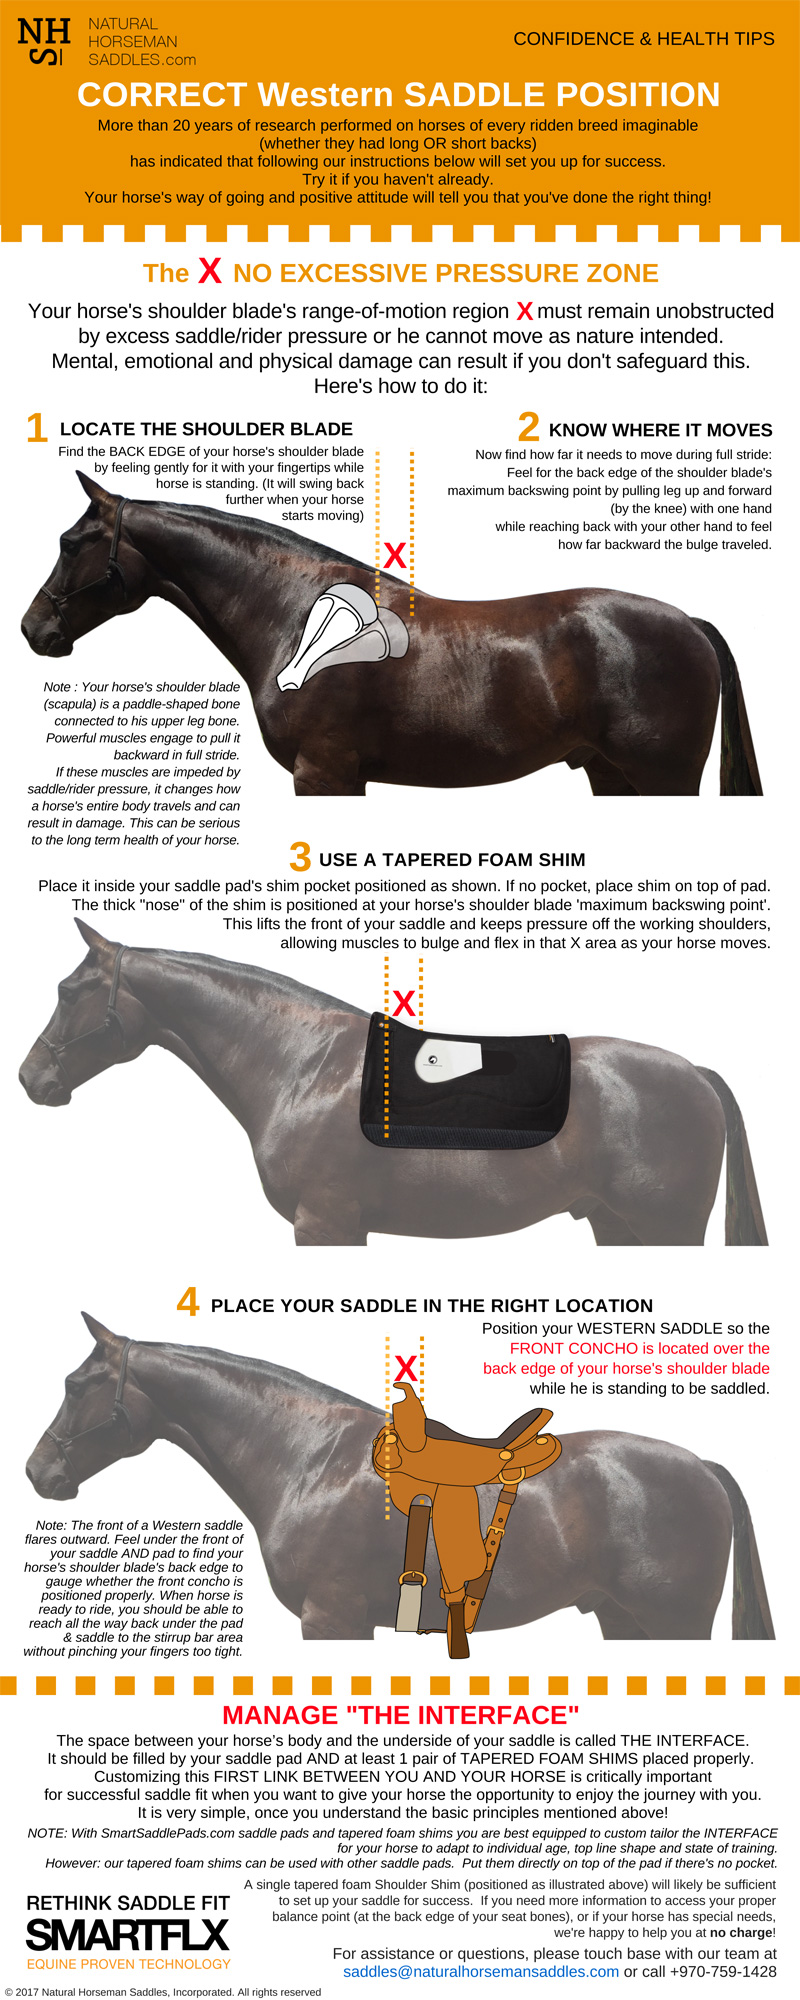 HOW TO BE CONFIDNT SADDLE POSITION WESTERN